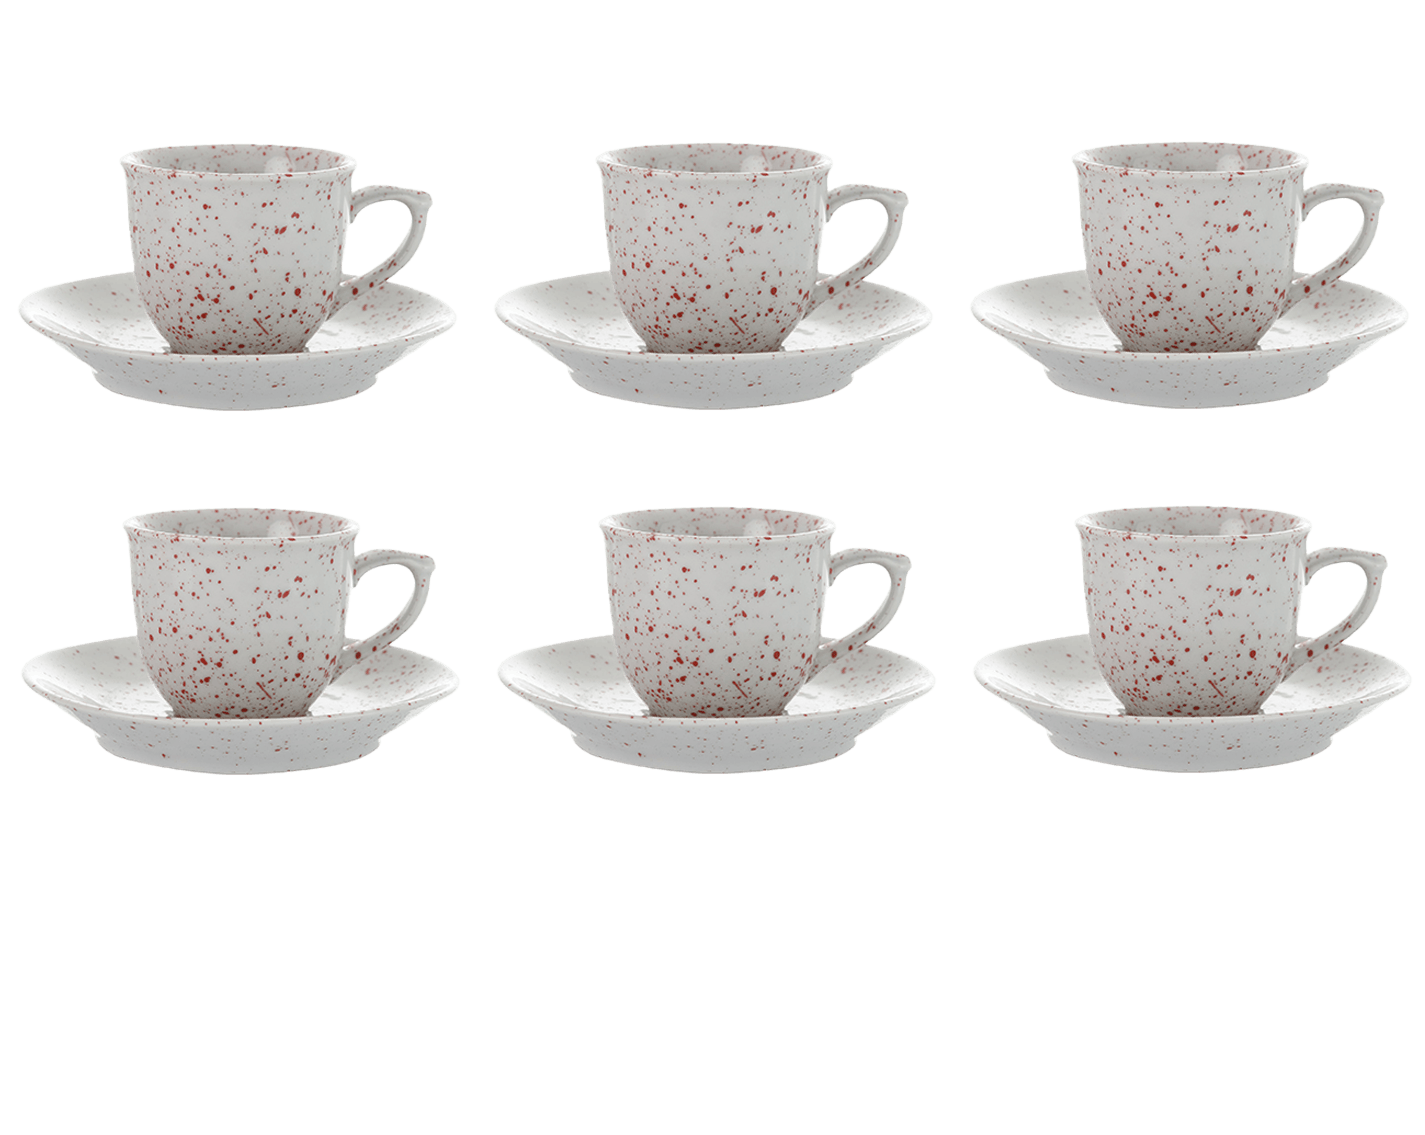 Senzo - Punti- Coffee Cup Set 6 Pieces with Saucer - Red - Porcelain - 165ml - 520001173x6